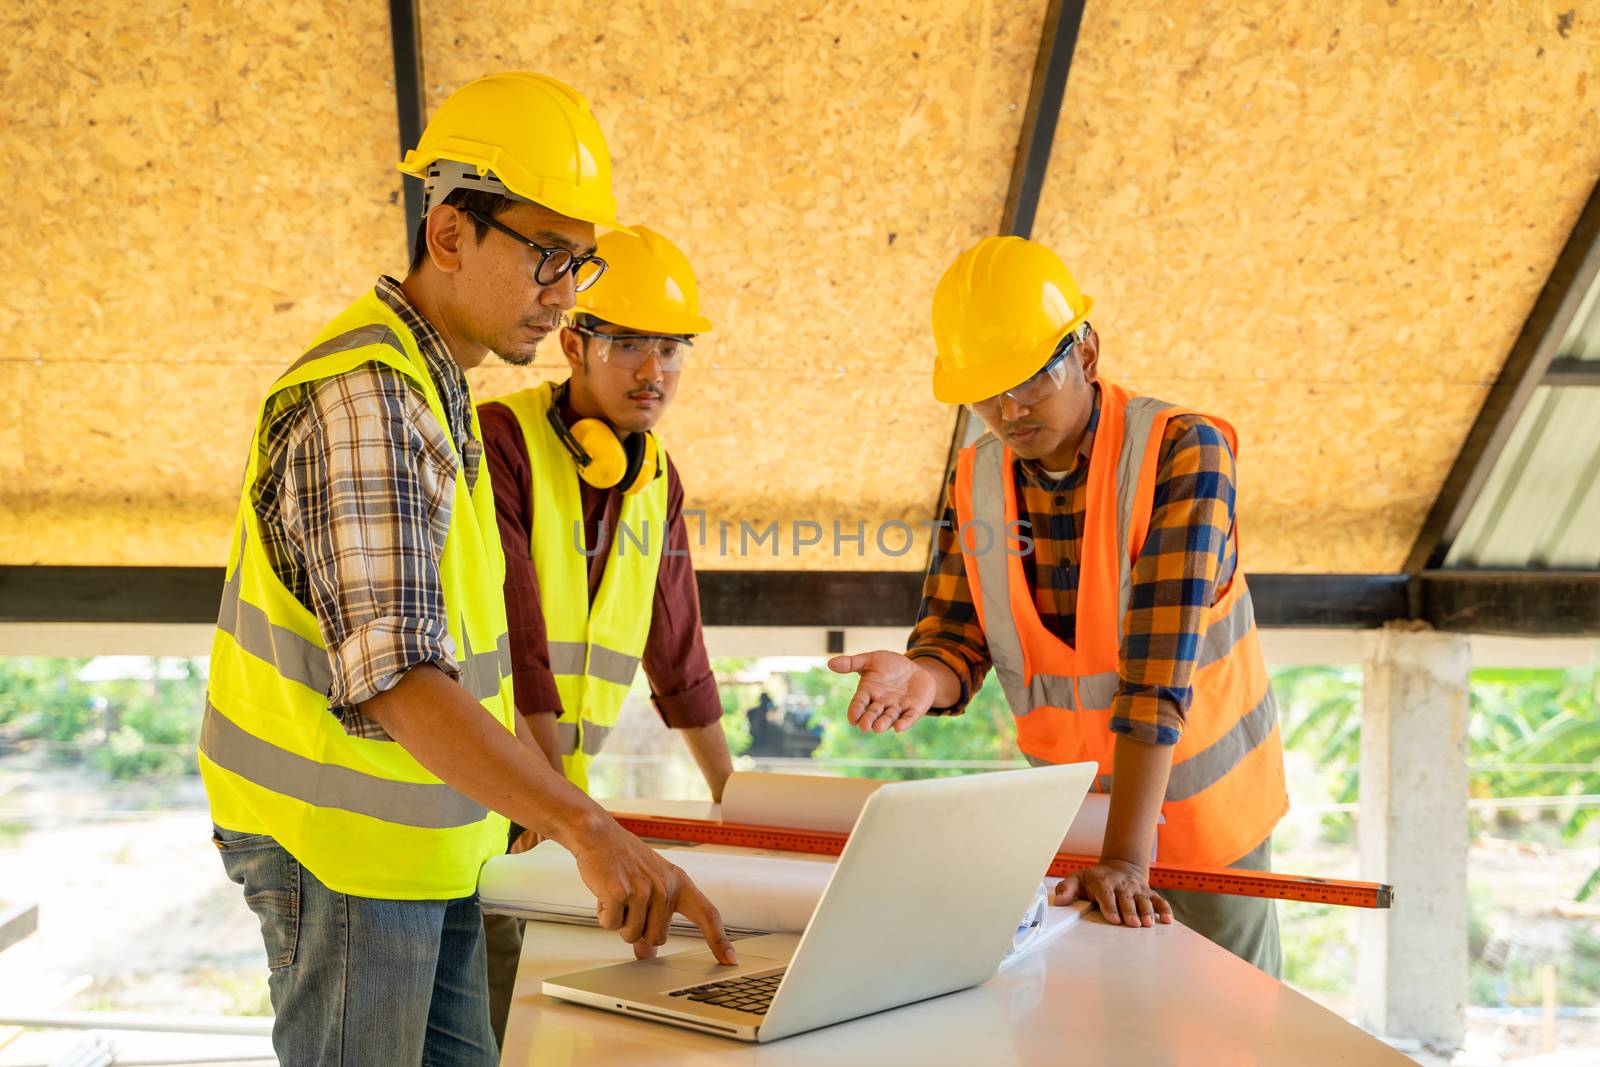 Engineer and architect meeting or discussing work in office or construction site.